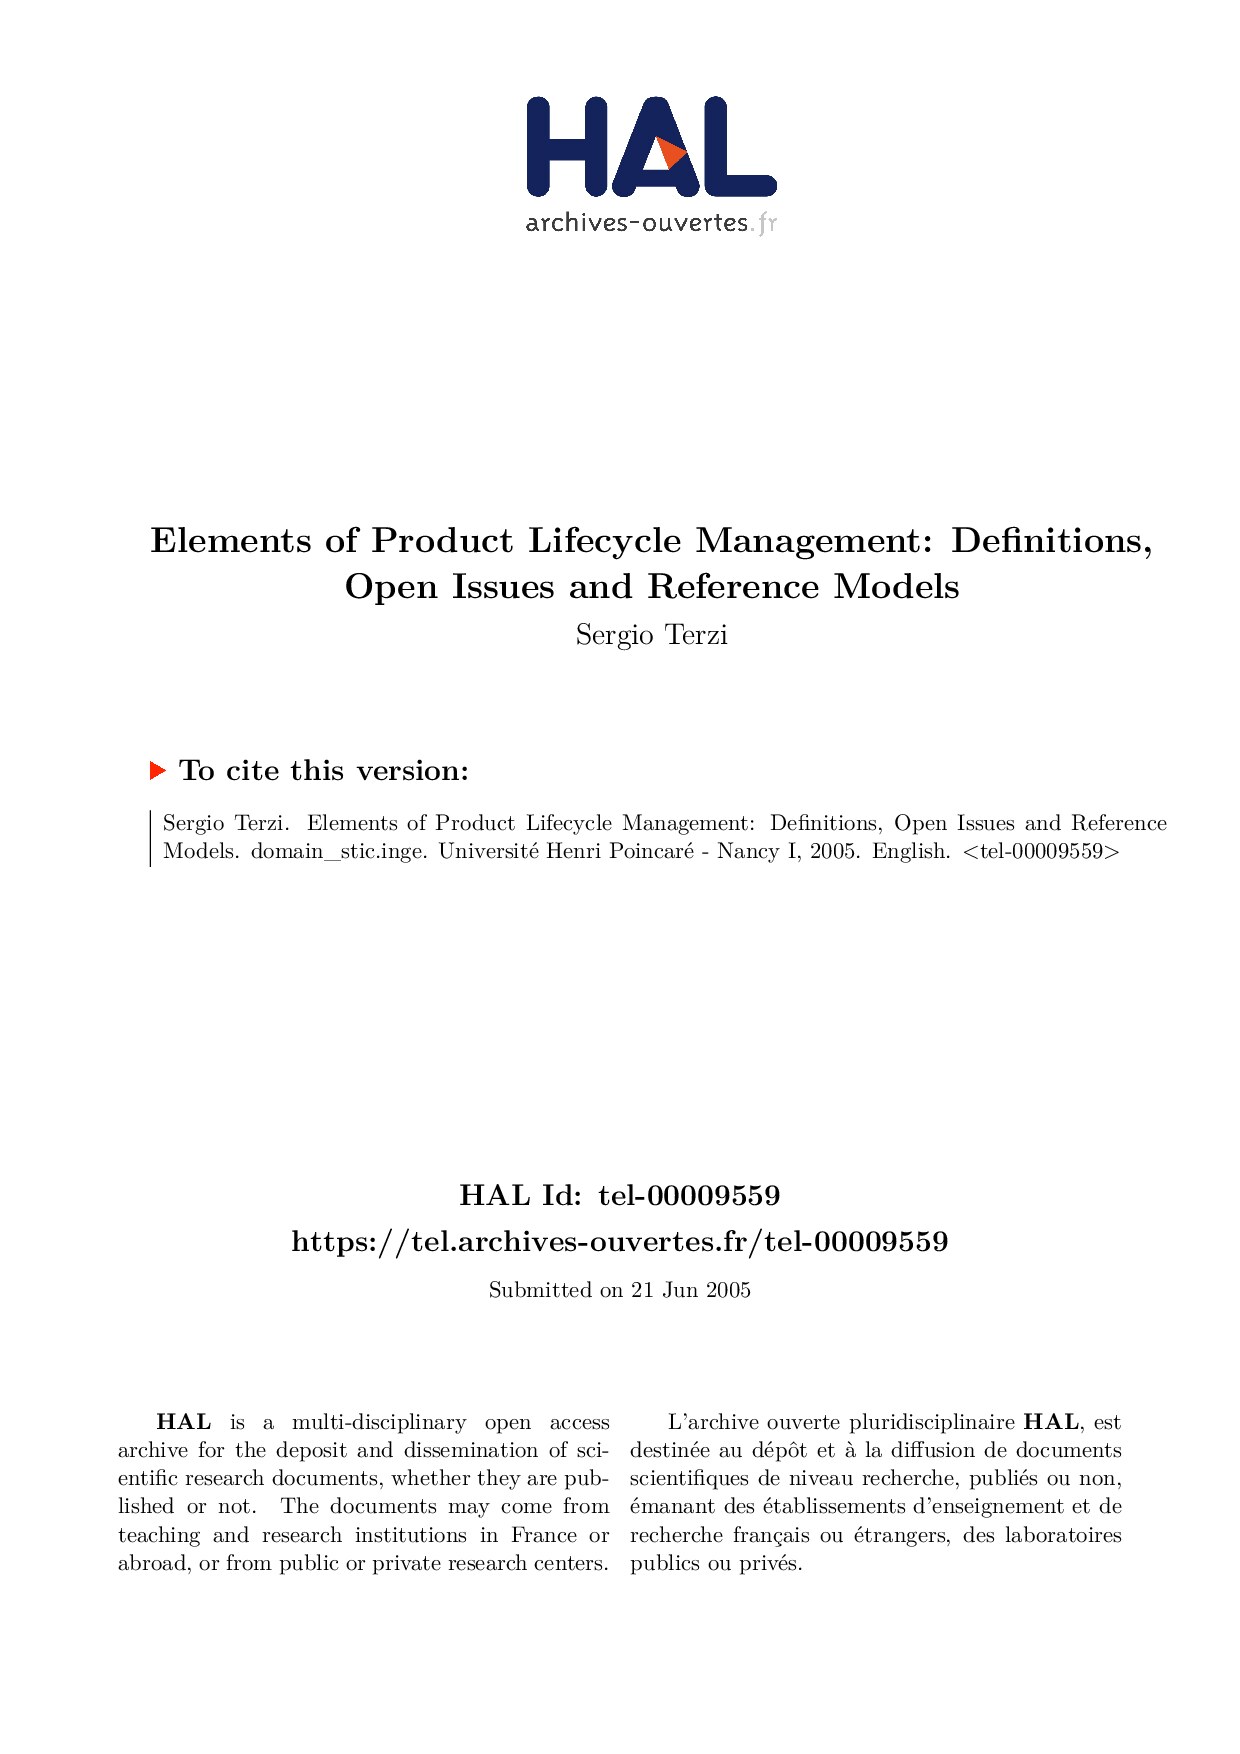 Elements of Product Lifecycle Management: Definitions, Open Issues and Reference Models